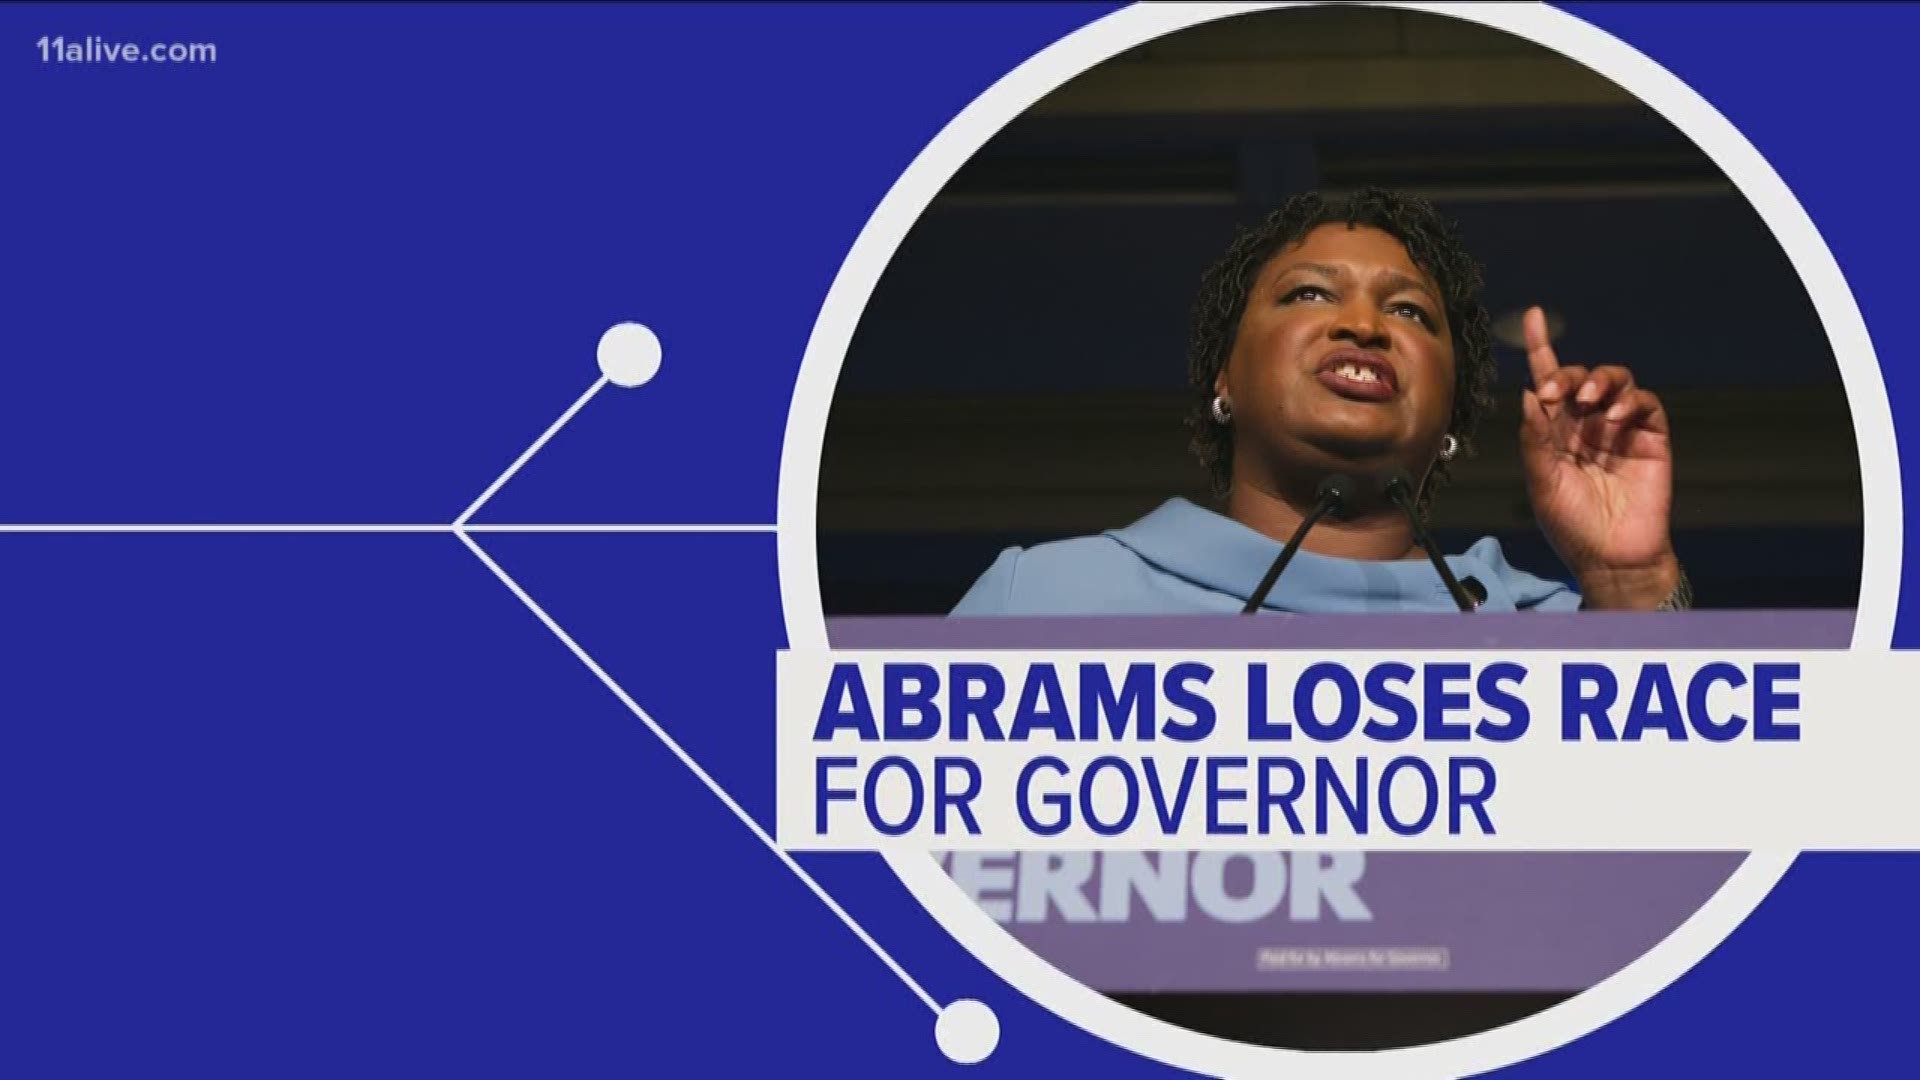 This fuels speculation that Abrams is interested in running for David Perdue's US Senate seat in 2020